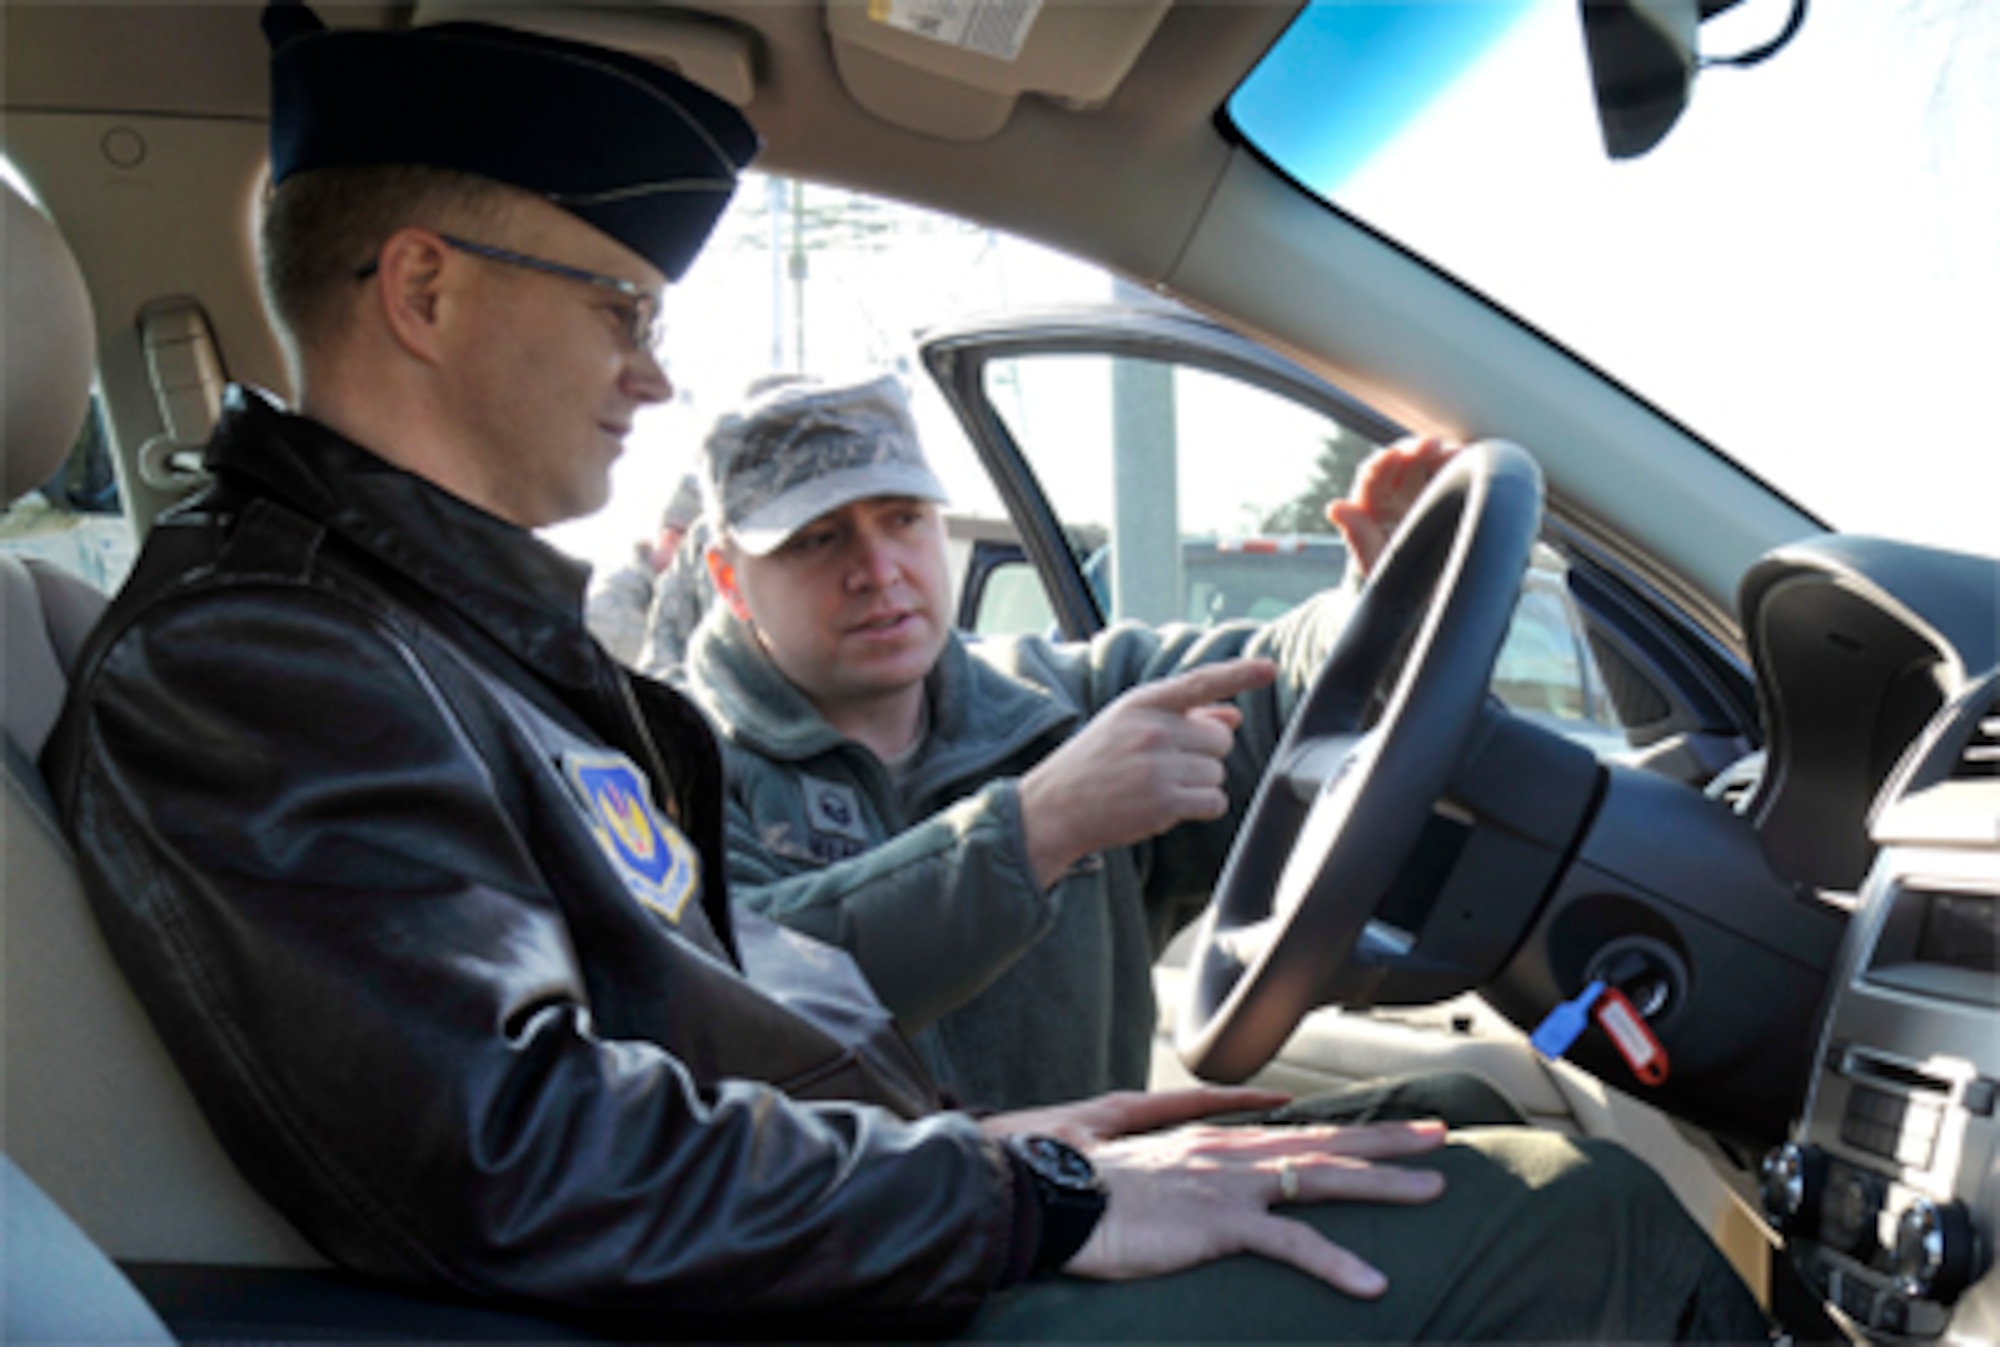 Master Sgt. Kevin Mead instructs Col. Christopher Weggemen on the proper use of his new hybrid vehicle Jan. 21, 2011, at Spangdahlem Air Base, Germany. Colonel Weggemen is the first person to drive a hybrid in the fleet at Spangdahlem AB, as a step toward the goal to comply with an executive order requiring a 34 percent reduction in greenhouse gas emissions by 2020 and 20 percent reduction of petroleum use by 2015. Sergeant Mead is a European Transportation Training Center instructor and Colonel Weggemen is the 52nd Fighter Wing commander. (U.S. Air Force photo/Airman 1st Class Brittney Frees)